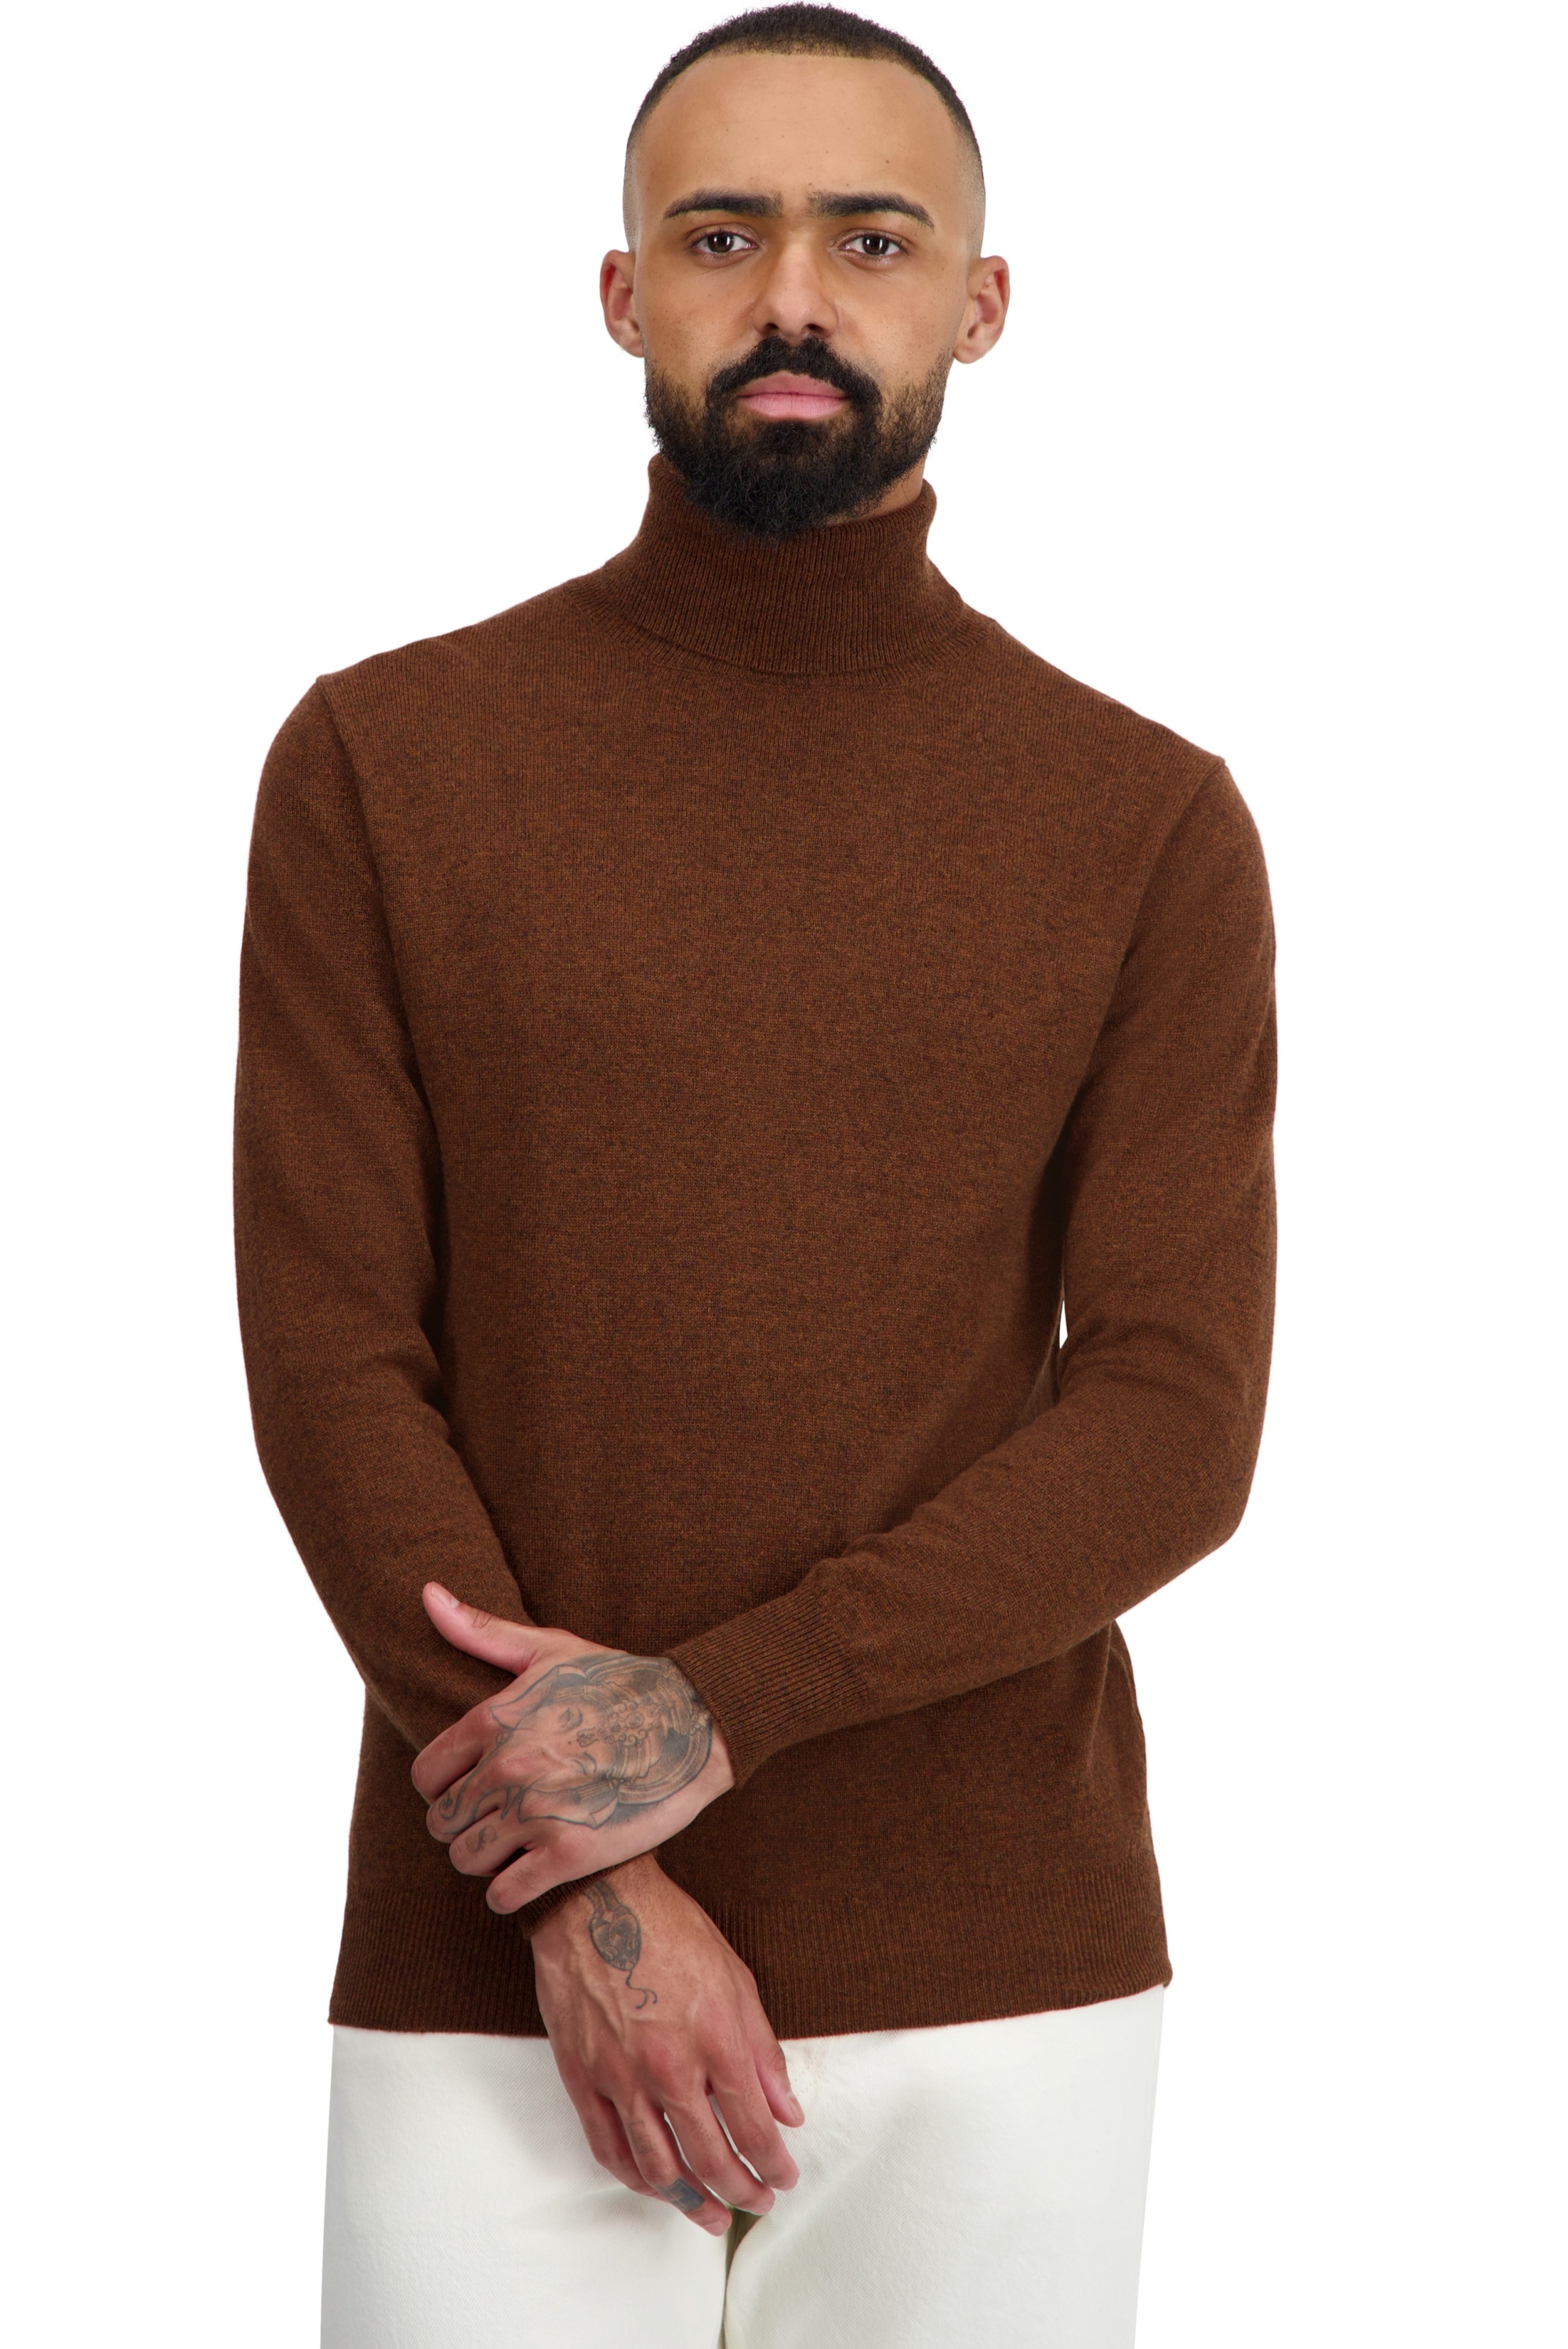 Cashmere men basic sweaters at low prices tarry first mace m